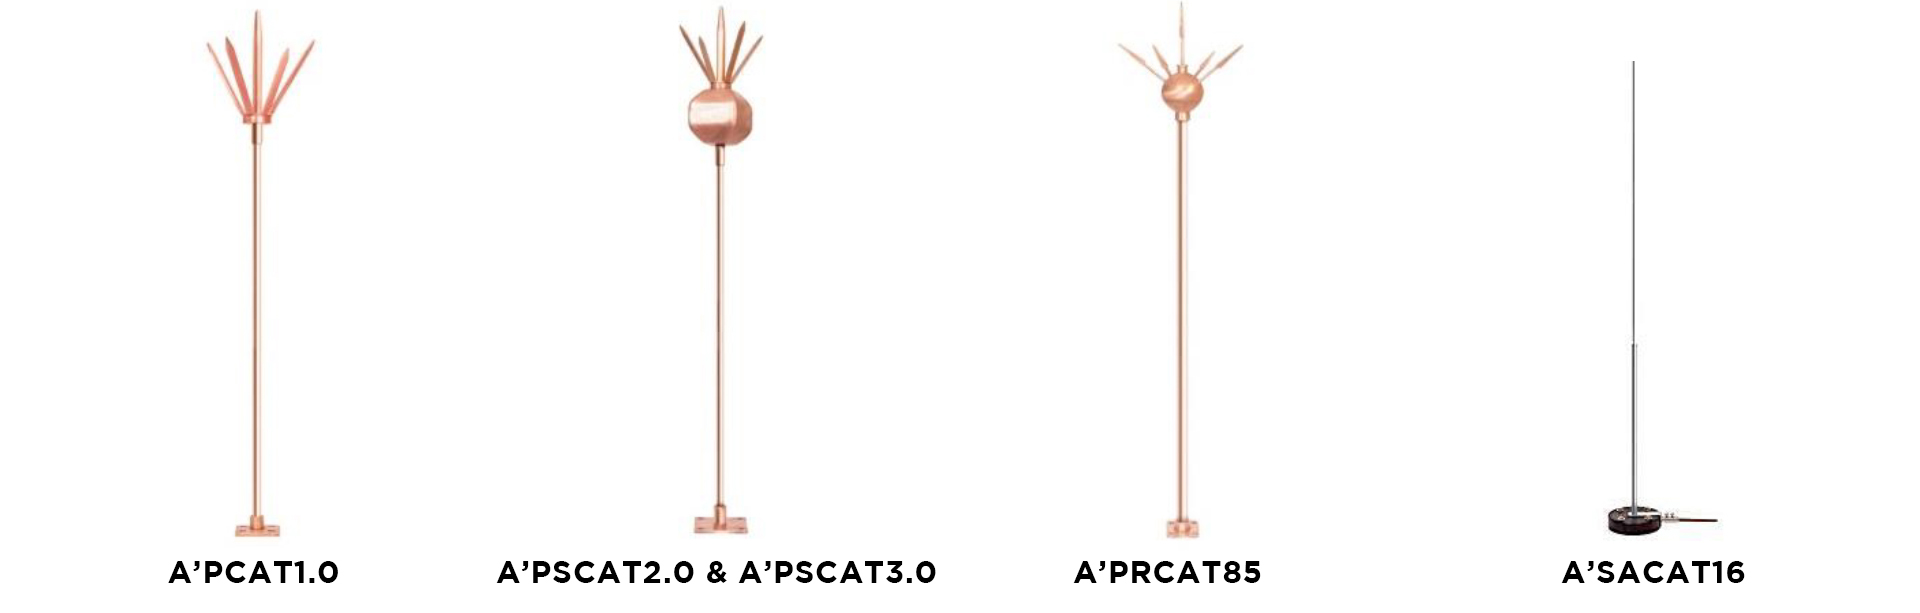 An image showing different lightning arrestors from CIKIT.